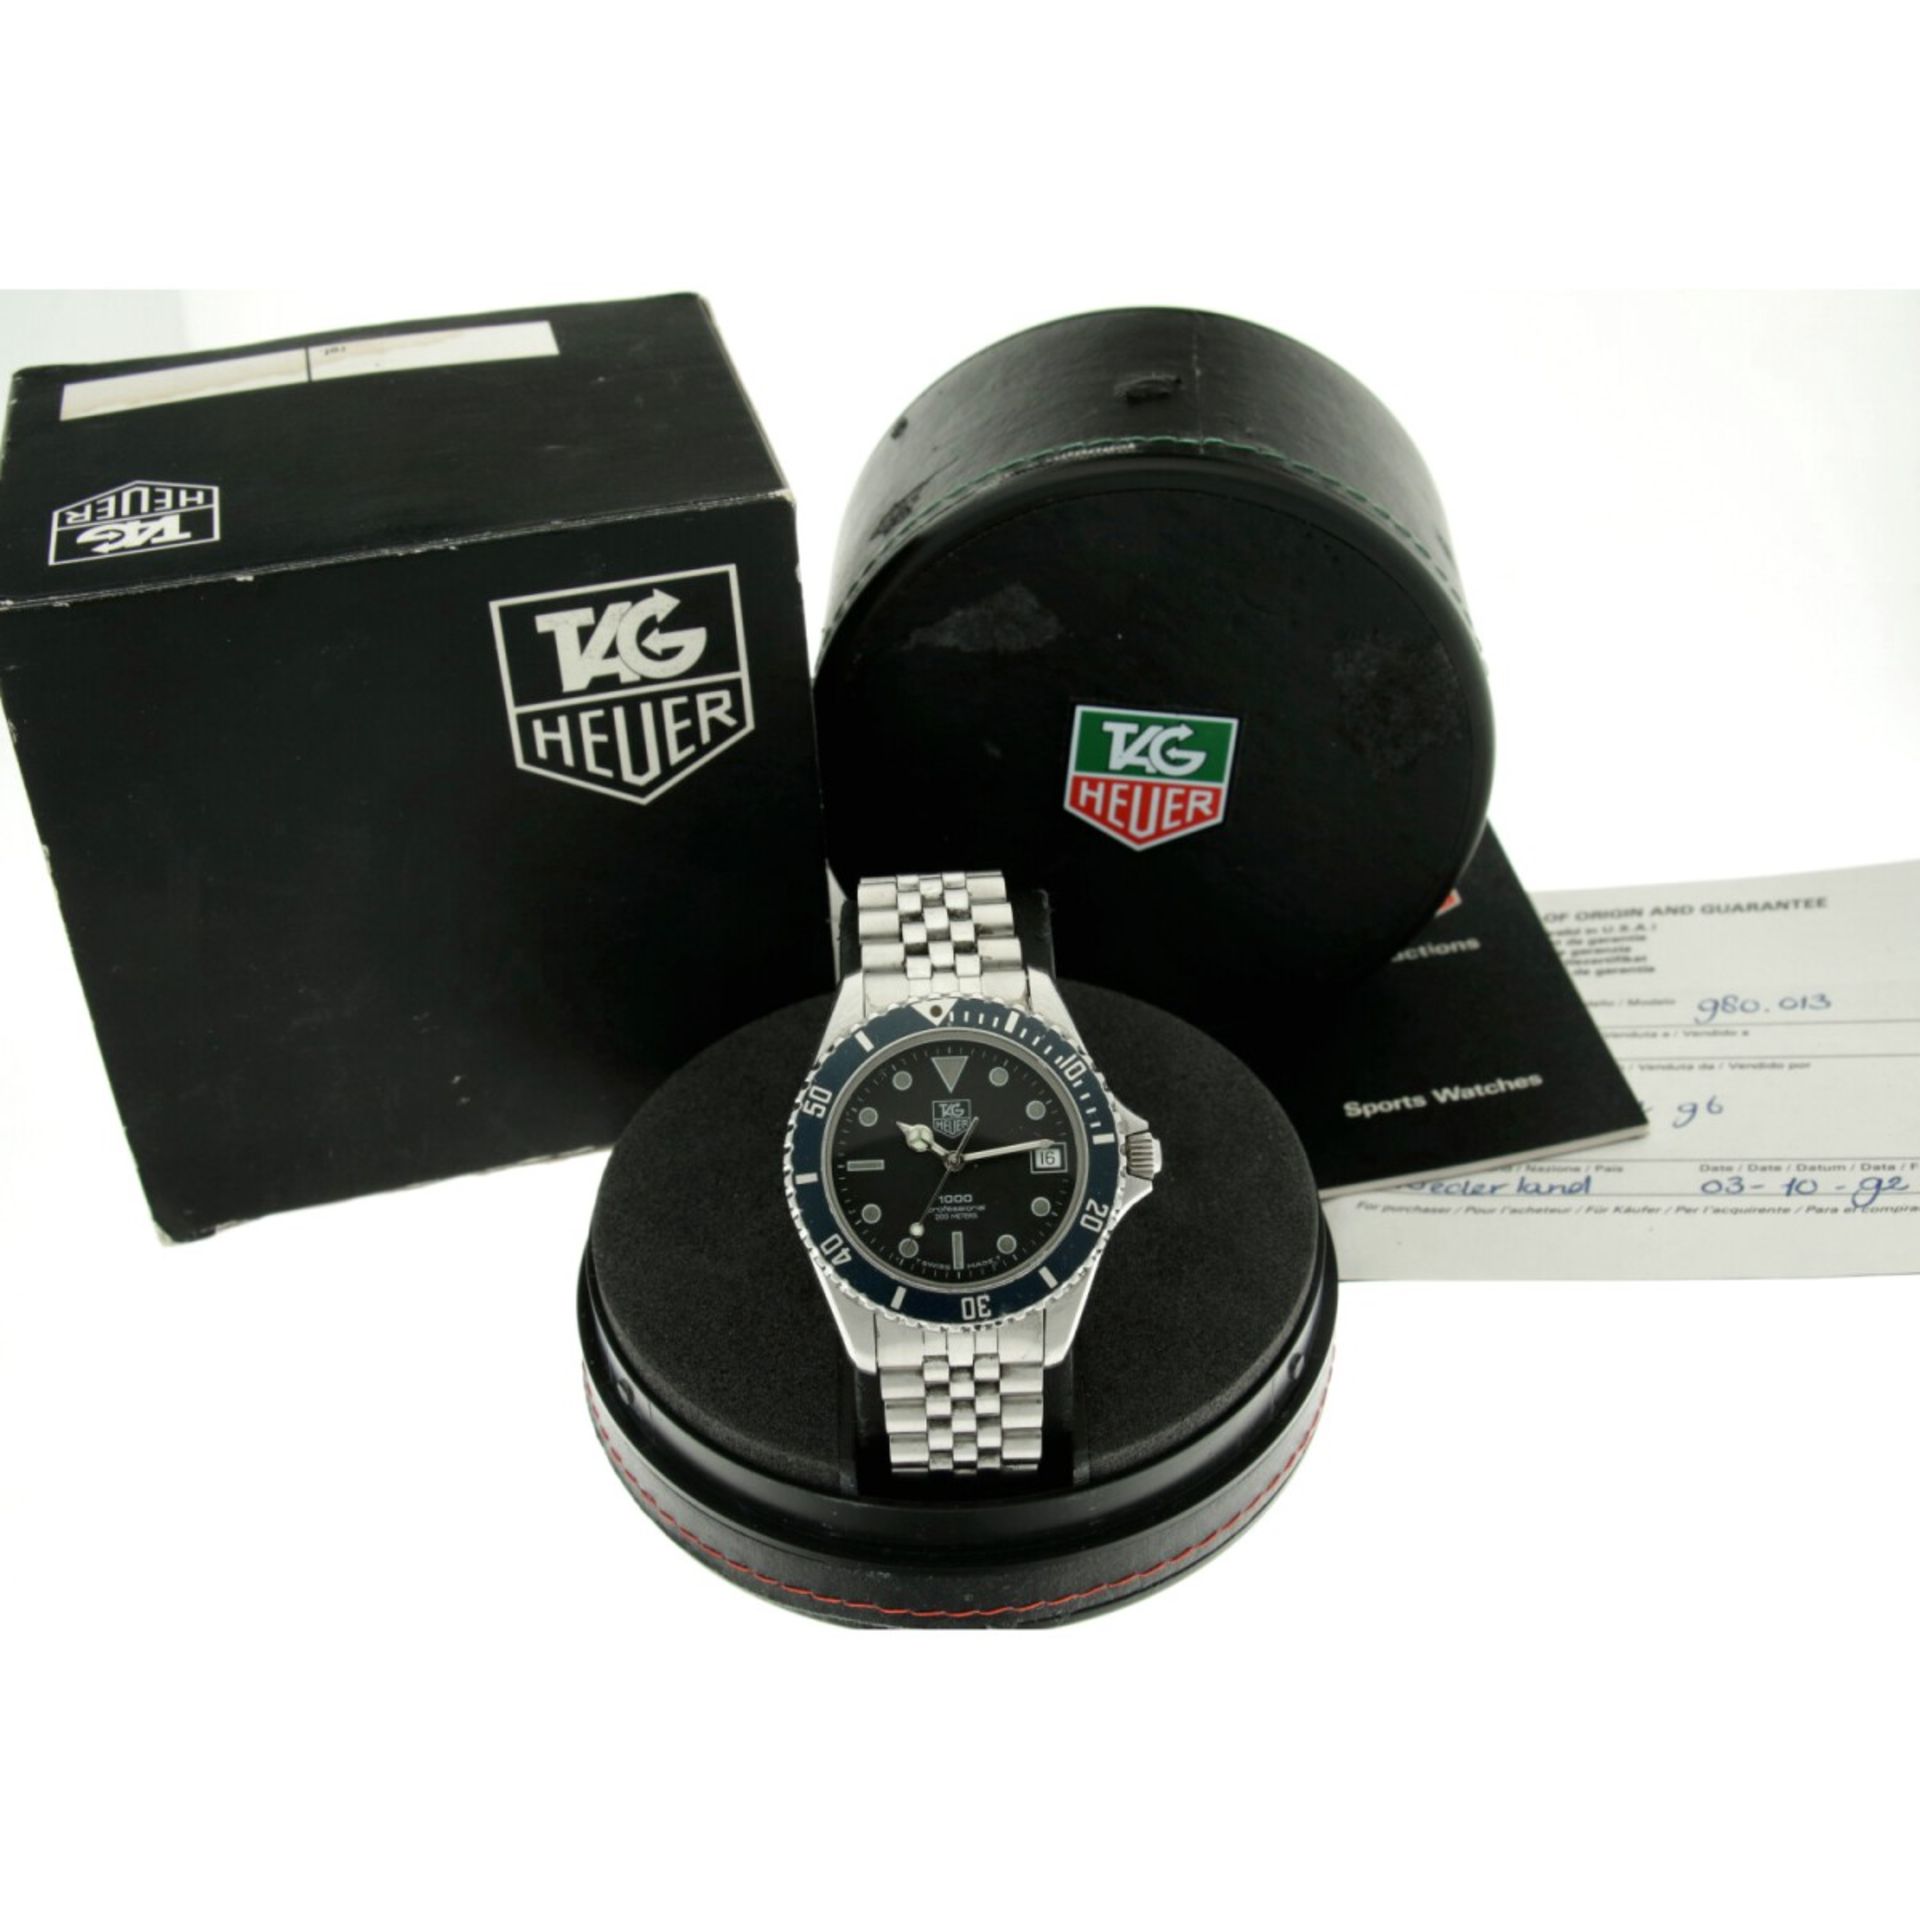 Tag Heuer 1000 Professional 980.013D - Men's watch appr. 1992. - Image 6 of 6